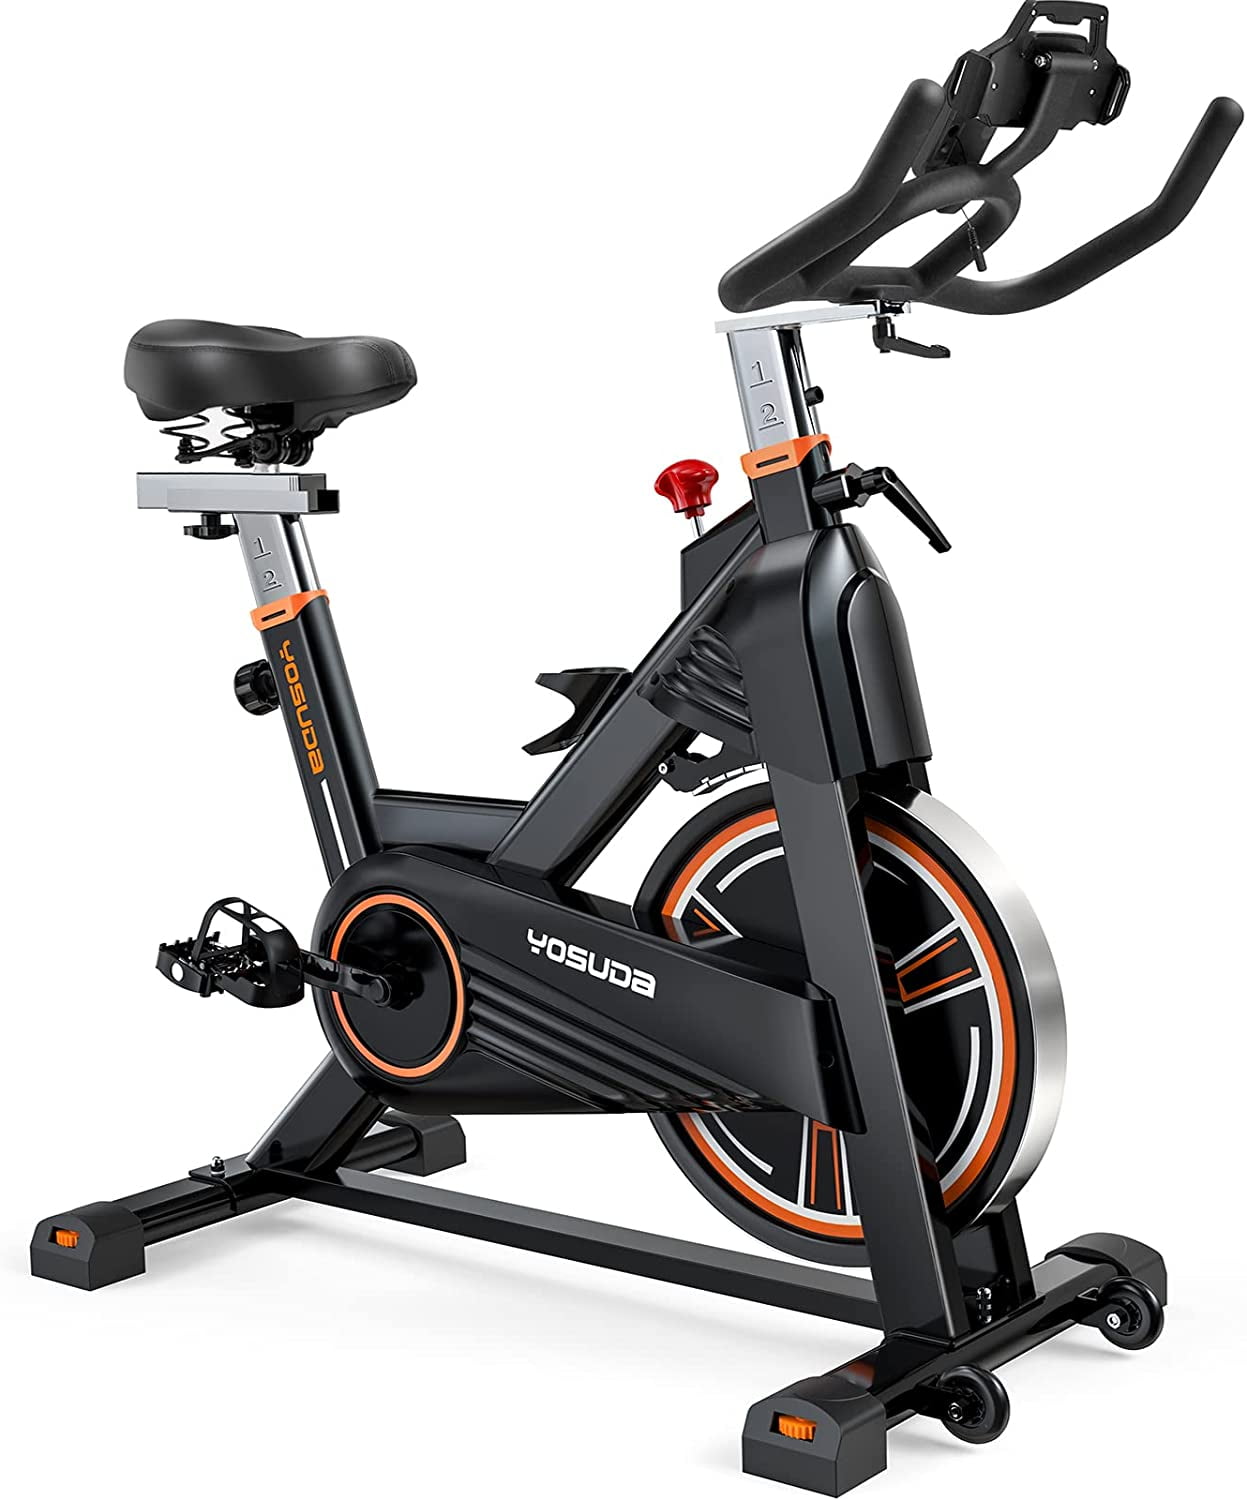 Details about   HEKA 2in1 Exercise Bike Fitness Indoor Cycling Stationary Bicycle Cardio Workout 